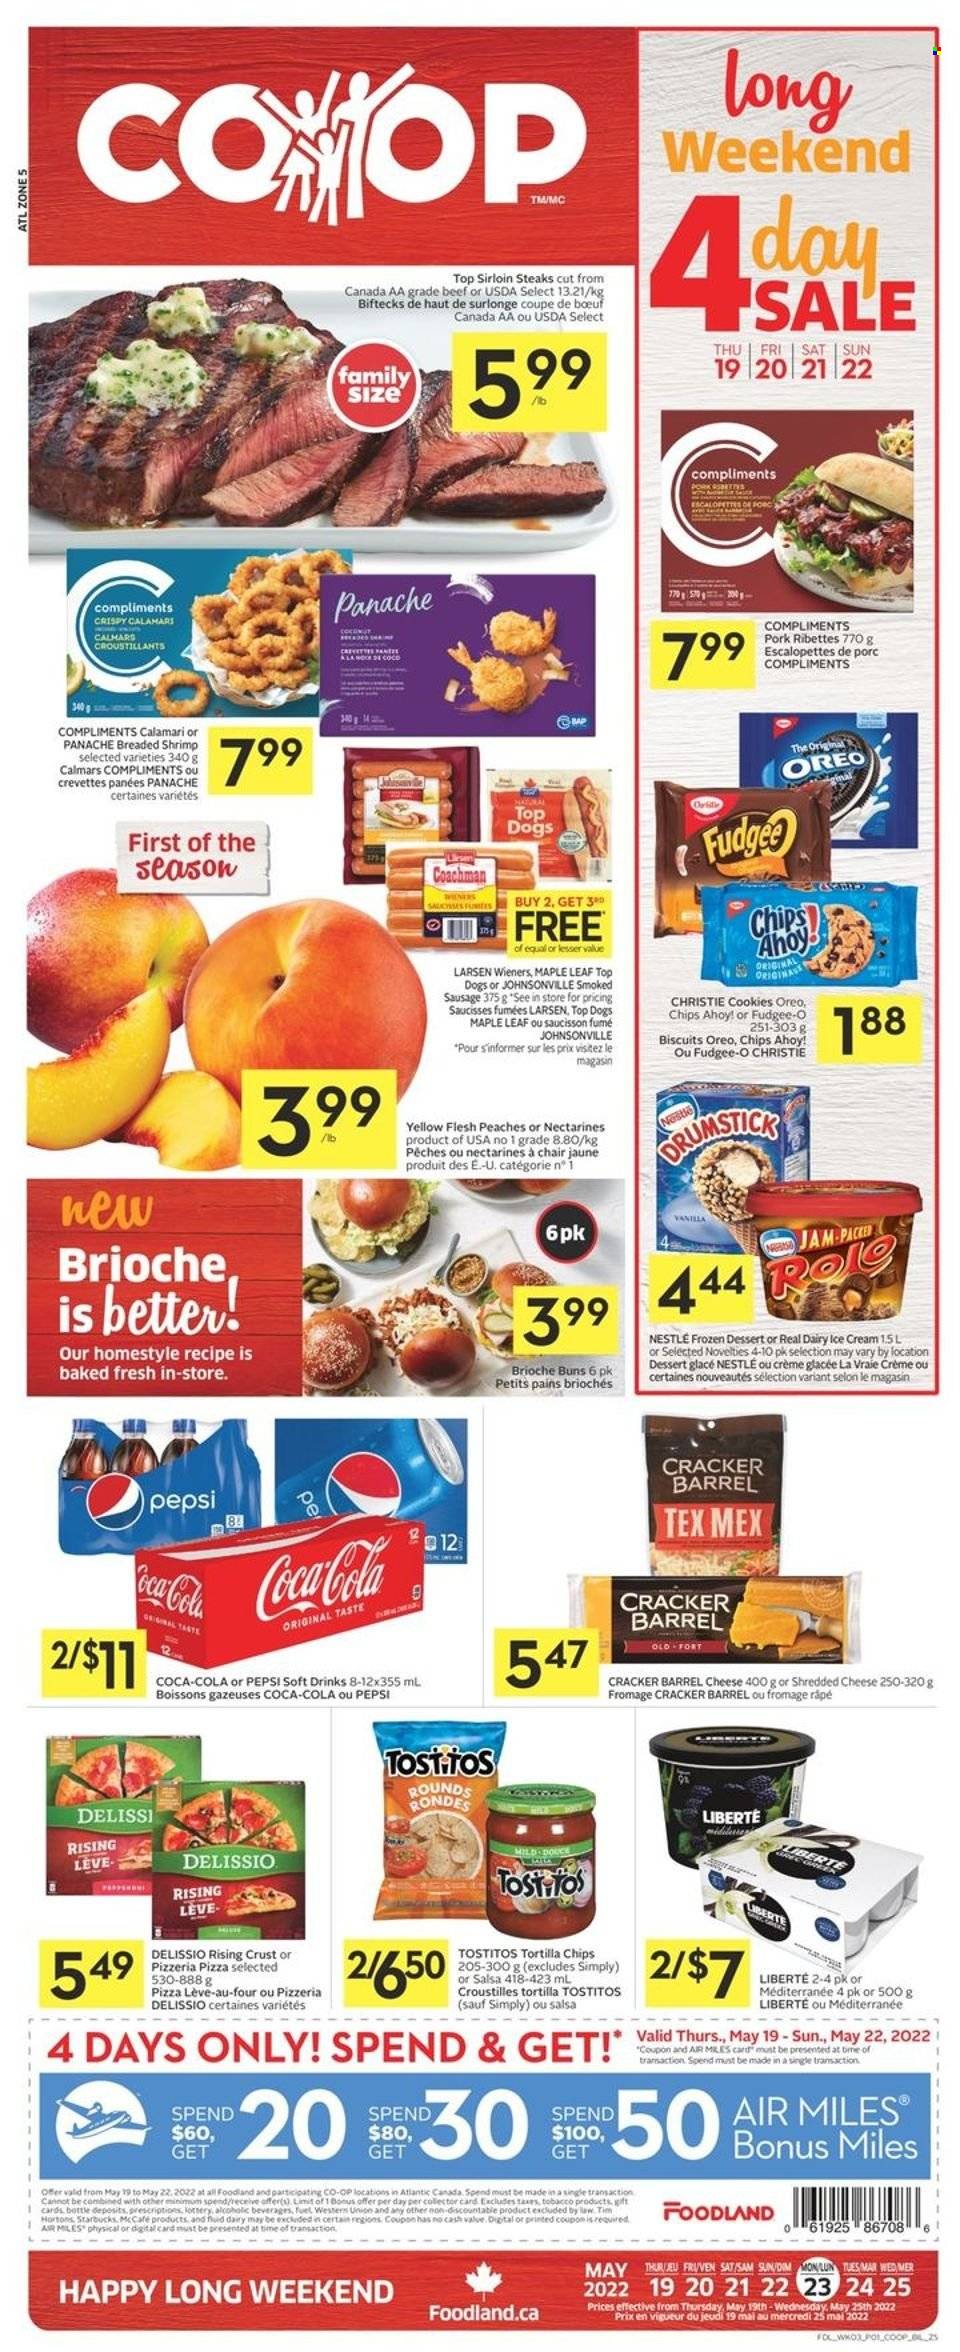 thumbnail - Co-op Flyer - May 19, 2022 - May 25, 2022 - Sales products - buns, brioche, nectarines, coconut, peaches, calamari, shrimps, pizza, Johnsonville, sausage, smoked sausage, shredded cheese, ice cream, cookies, fudge, crackers, biscuit, Chips Ahoy!, tortilla chips, Tostitos, salsa, fruit jam, Coca-Cola, Pepsi, soft drink, Starbucks, McCafe, sirloin steak, Nestlé, Oreo, steak. Page 1.